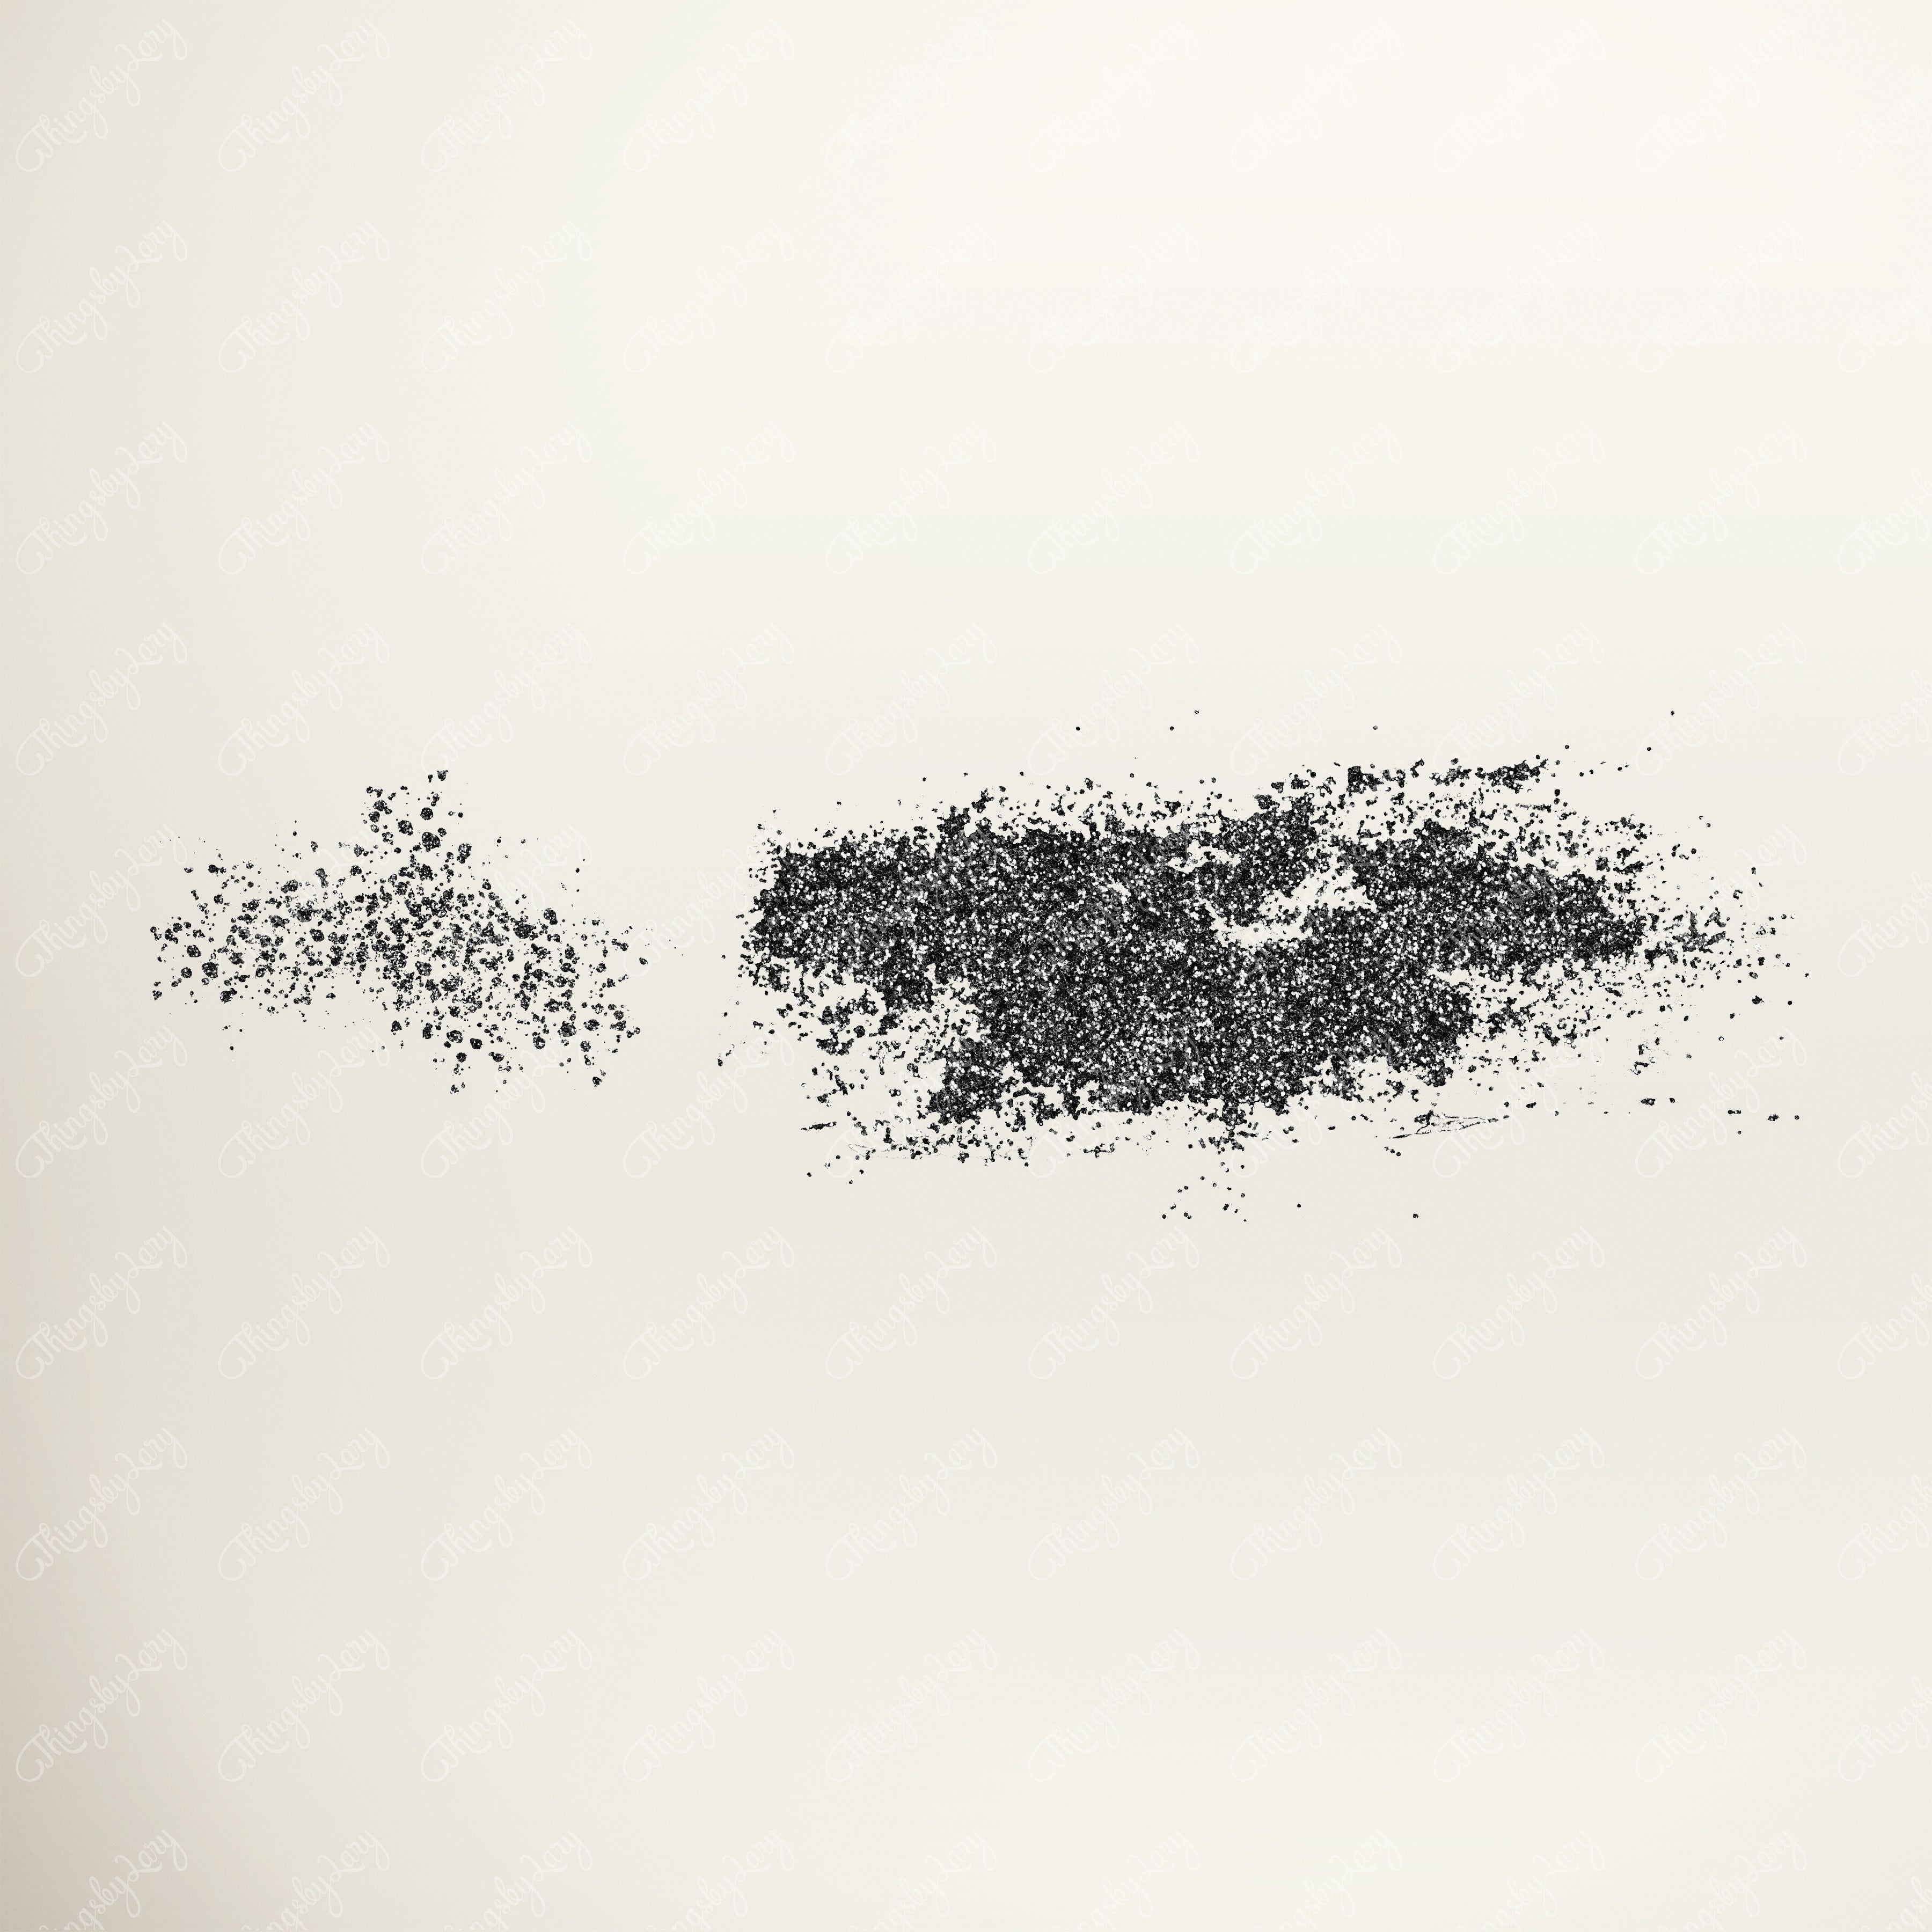 70 Black Glitter Particles Set PNG Overlay Images